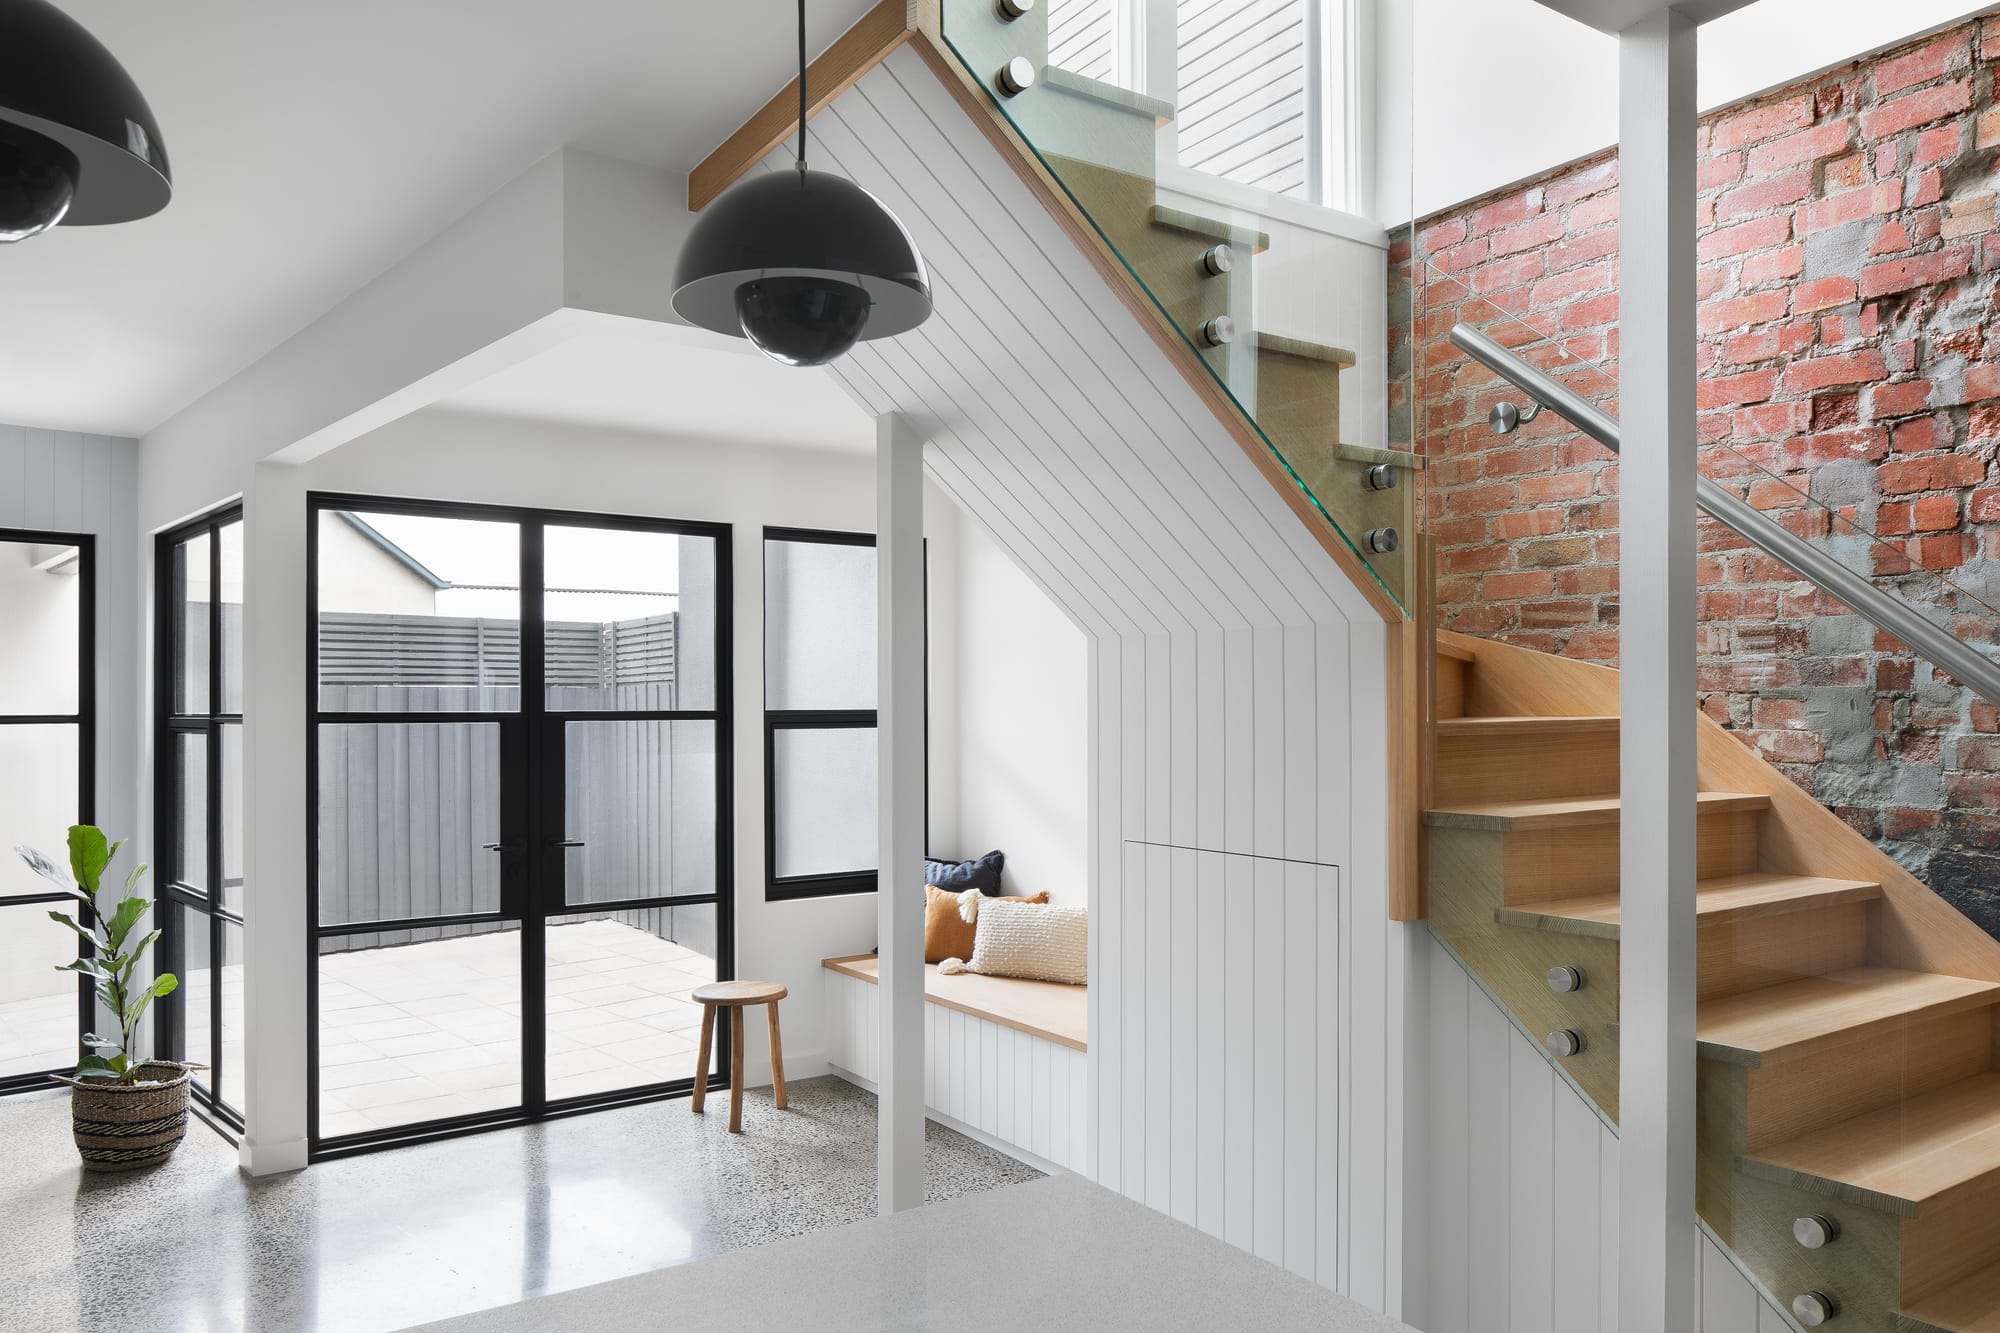 Stead House by Hannaford Design Studio. Photography by Emily Bartlett. Interior of ground floor of residential home with timber staircase to the right and black framed French doors to the left. Polished concrete floors. Exposed brick wall. 